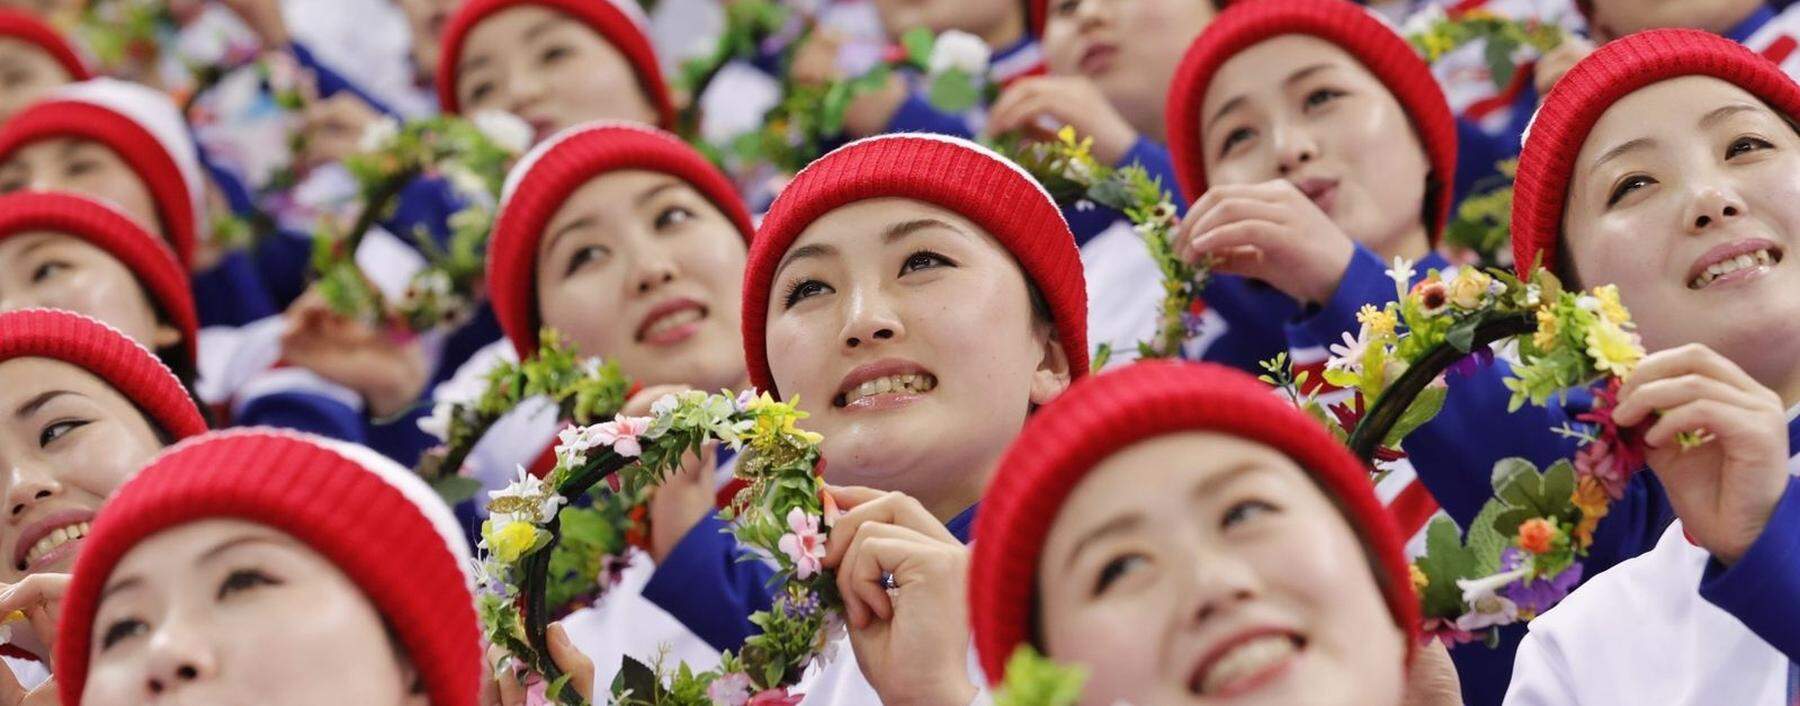 Members of North Korean cheering squad look at themselves in a mirror at a ladies' room at an expressway service area in Gapyeong